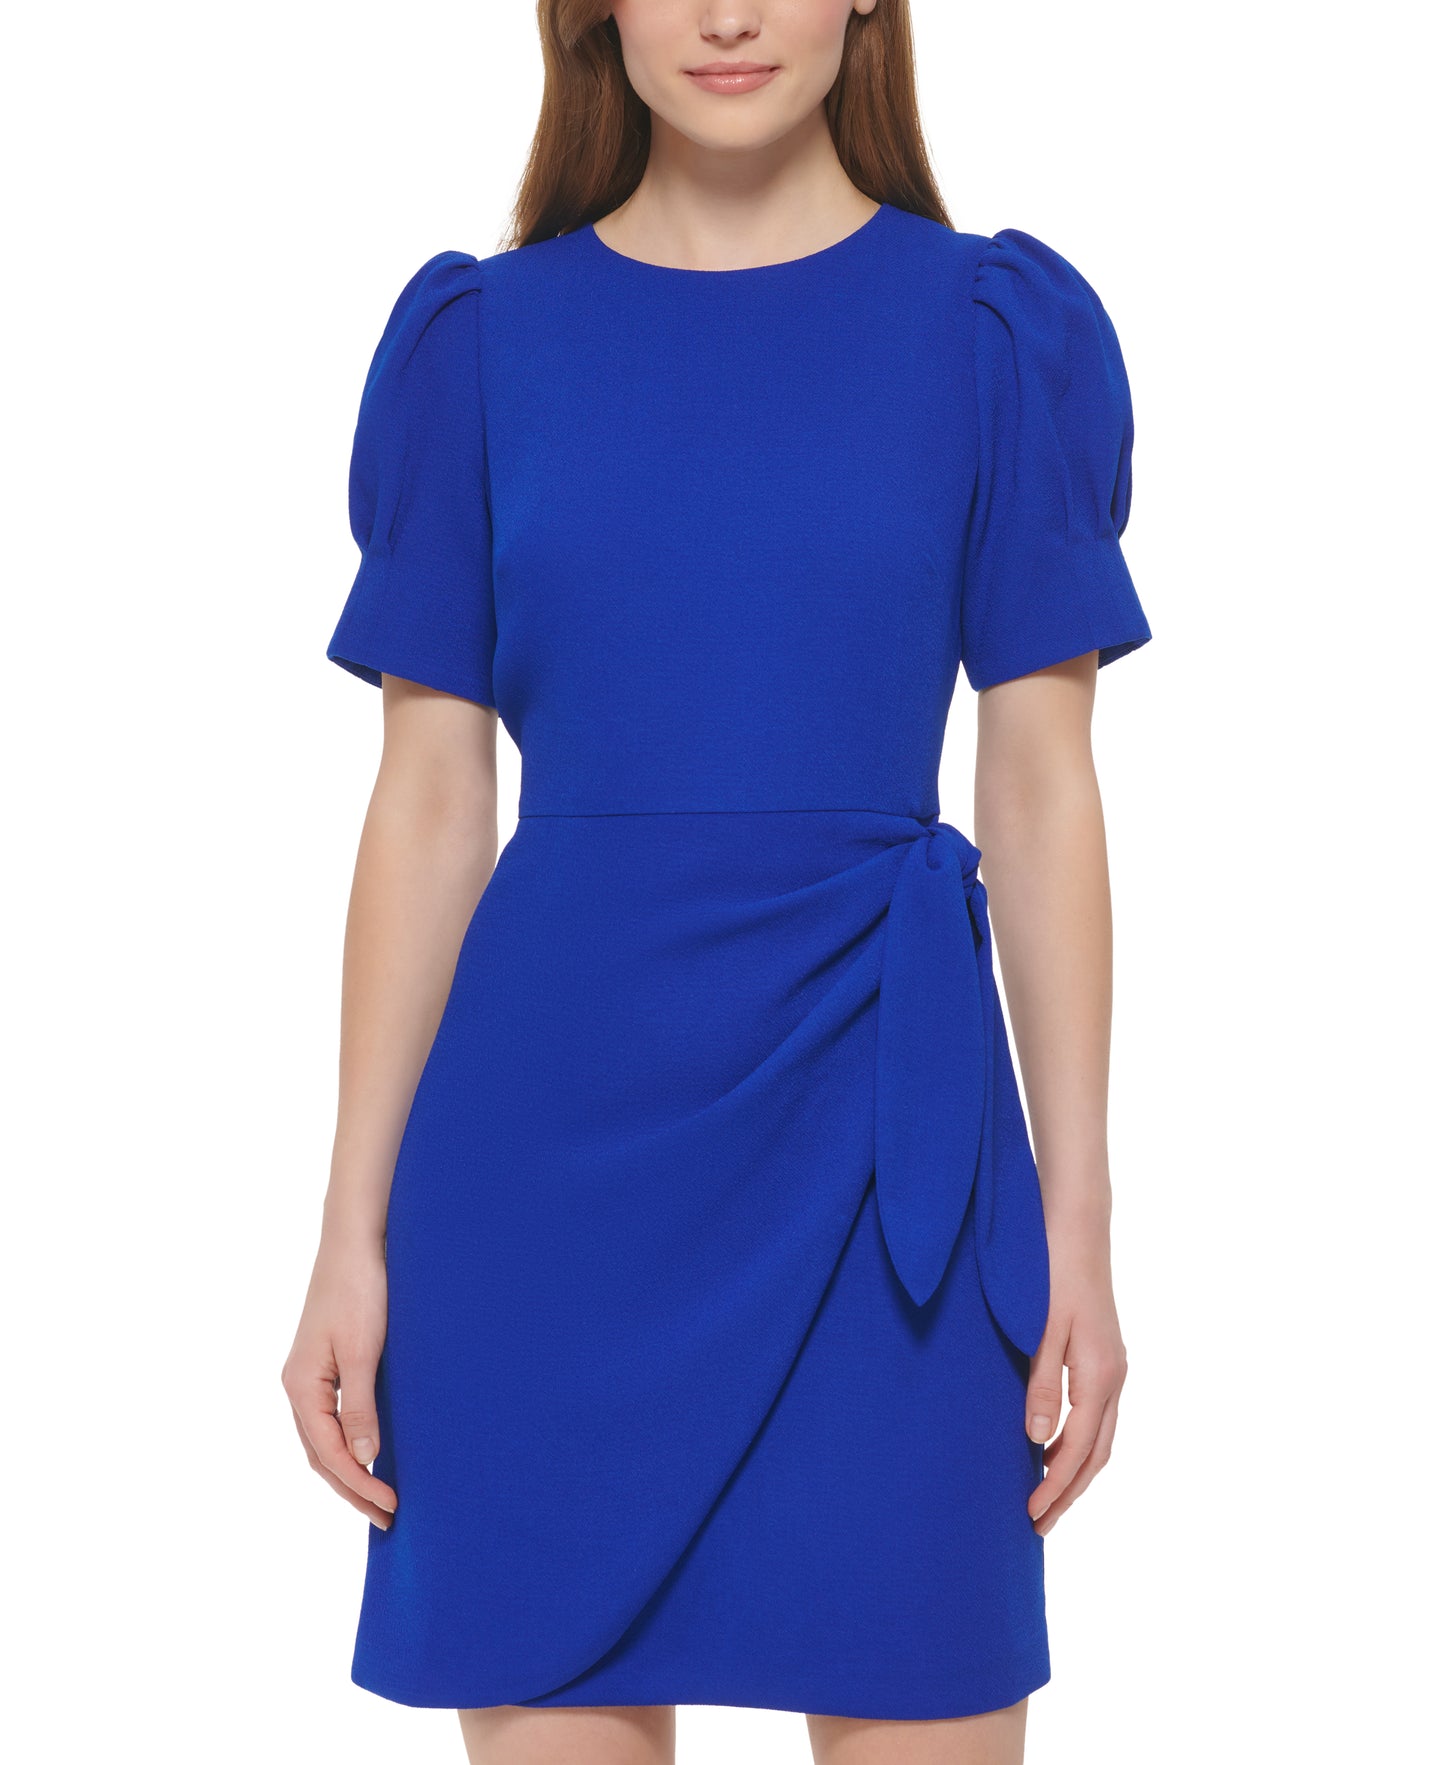 Crepe Novelty Sleeve Wrap Tie Dress by Vince Camuto in Coblat